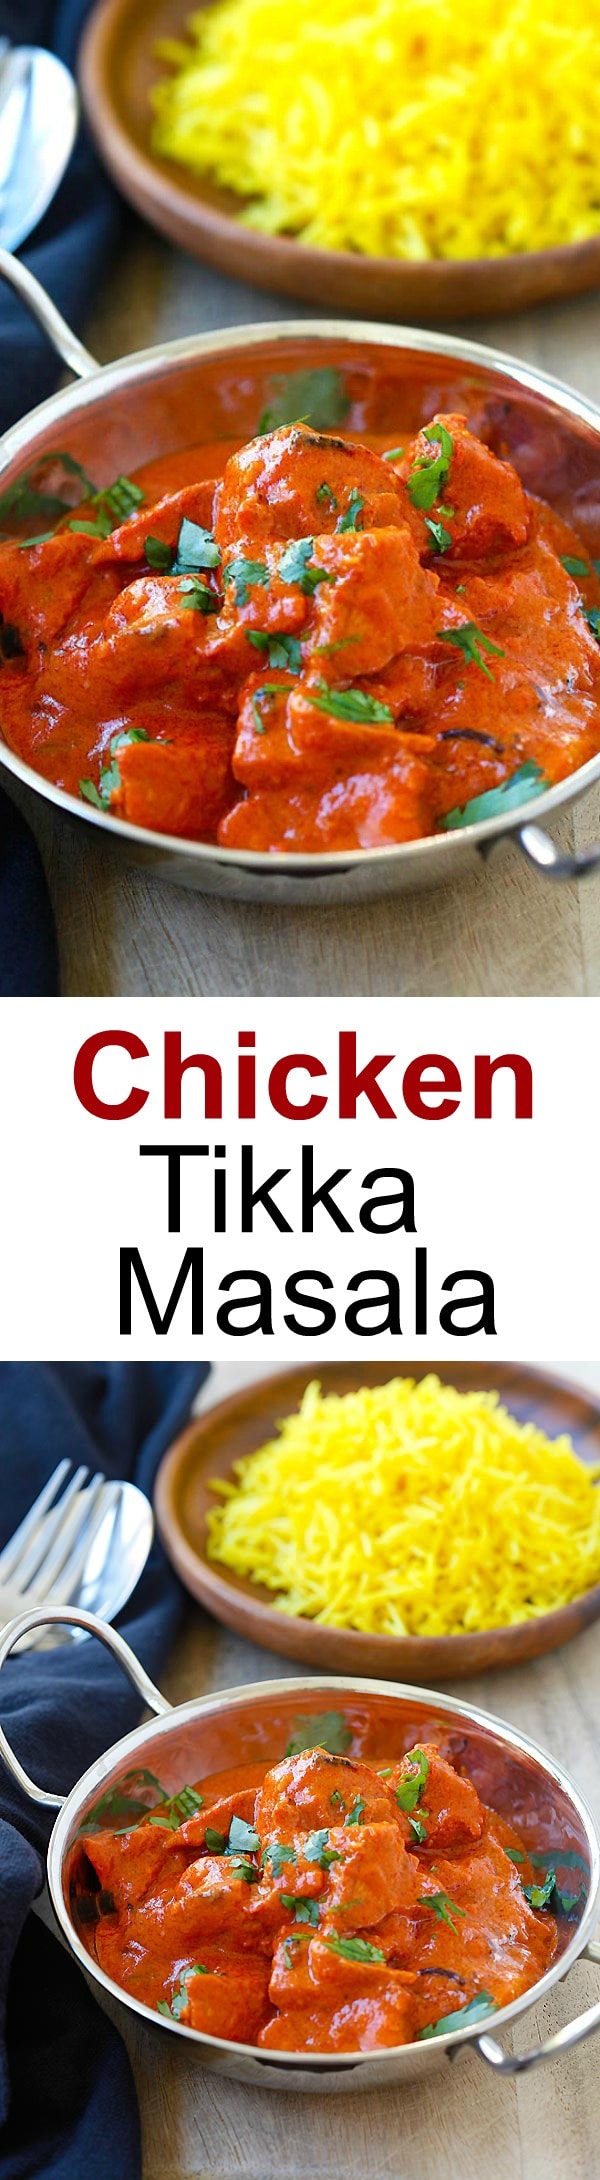 Chicken Tikka Masala - rich and creamy chicken tikka masala recipe with spicy tomato sauce. Easy and much better than Indian restaurants | rasamalaysia.com